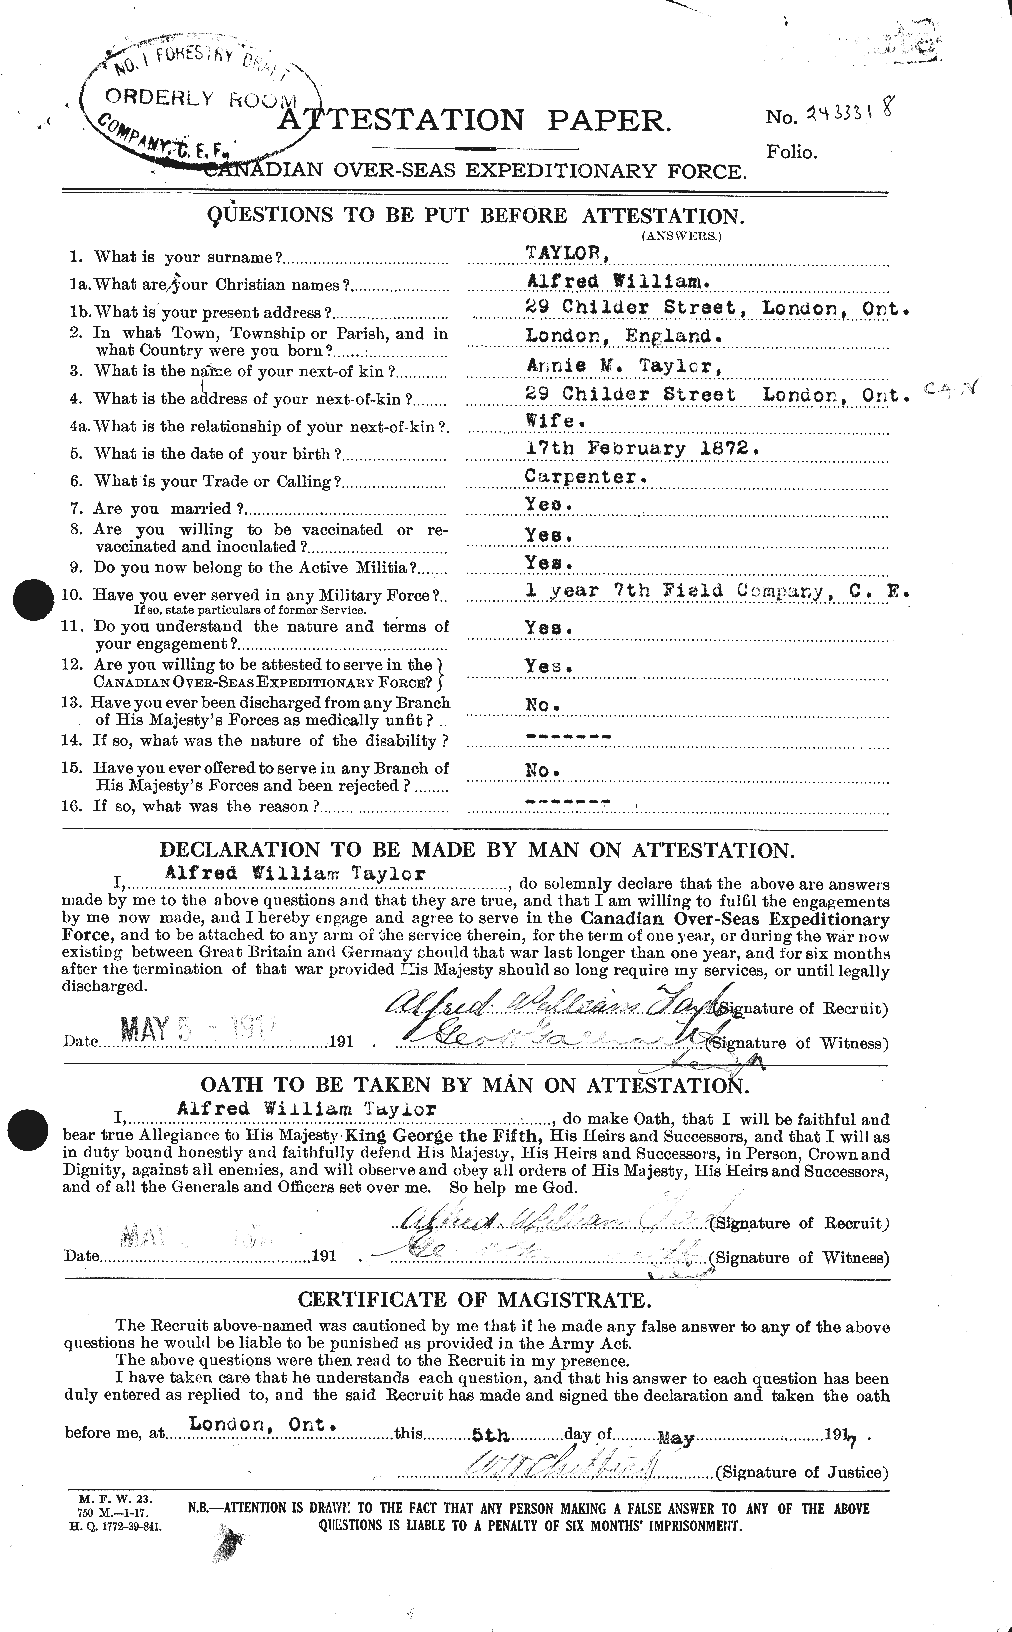 Personnel Records of the First World War - CEF 626199a